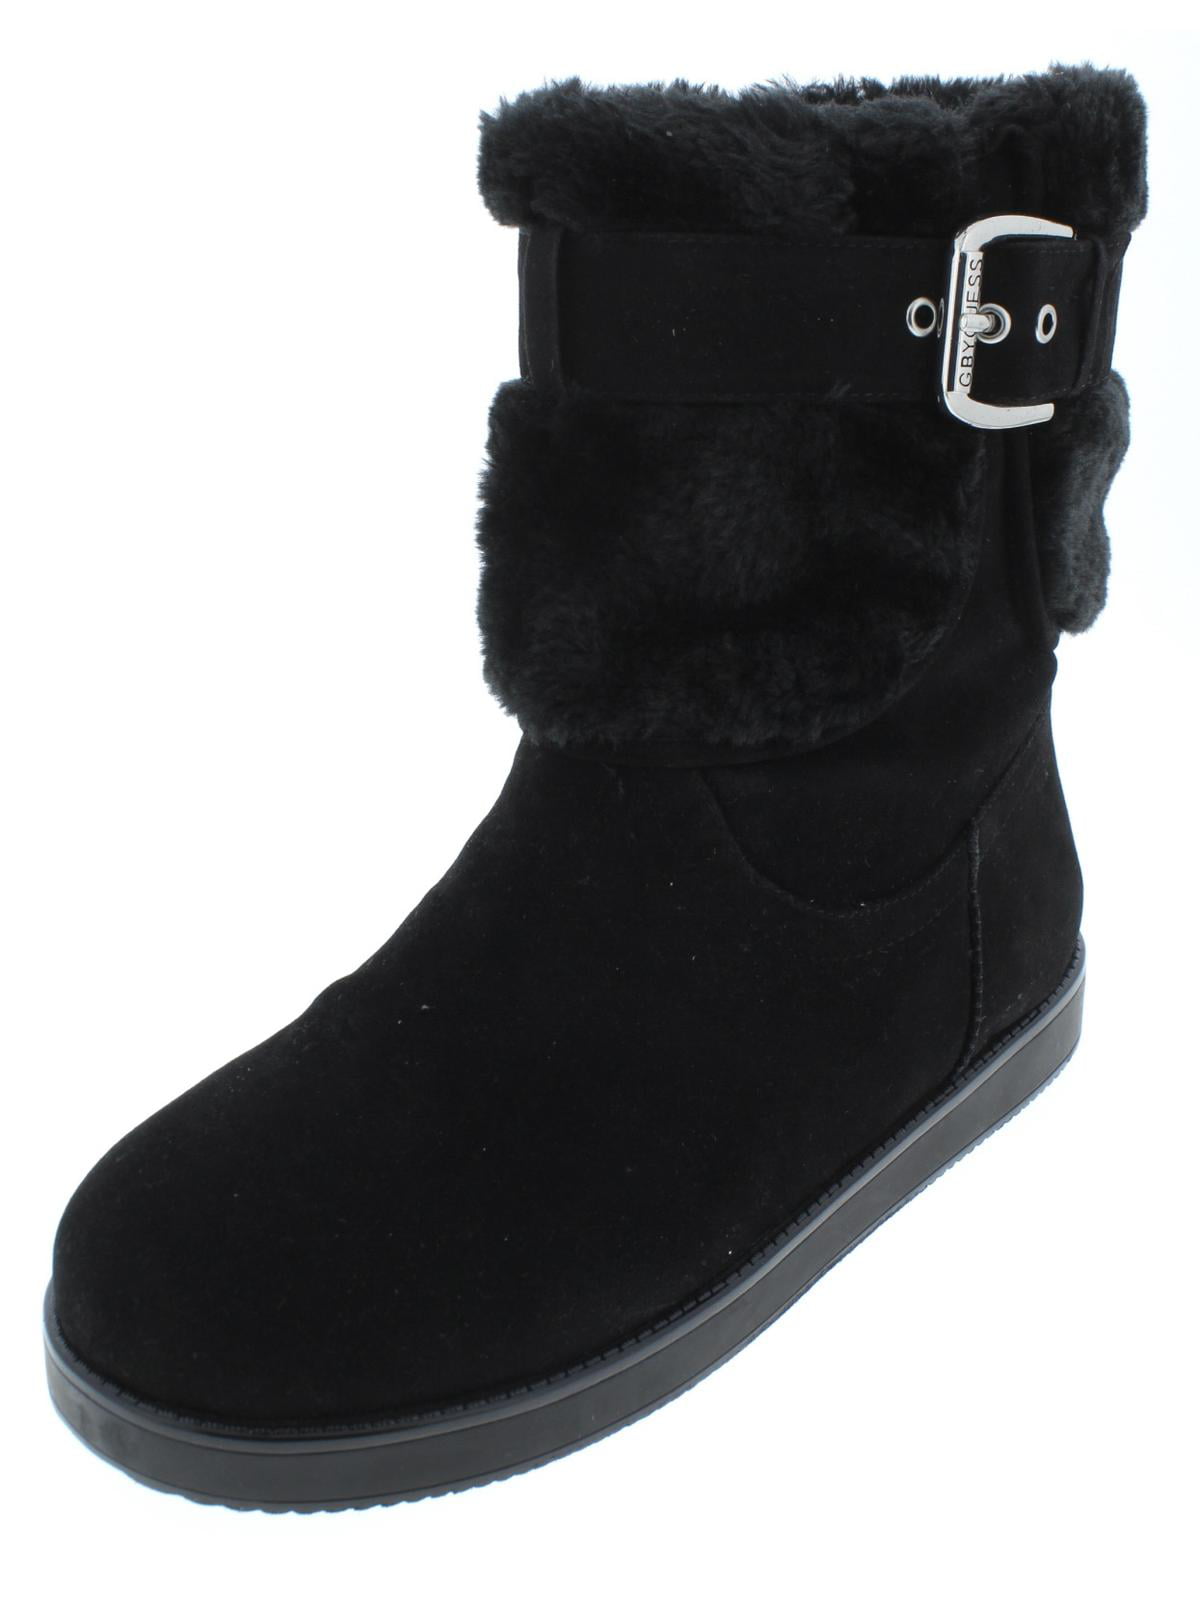 G by Guess Womens Amburr Faux Suede Cold Weather Winter Boots - Walmart.com